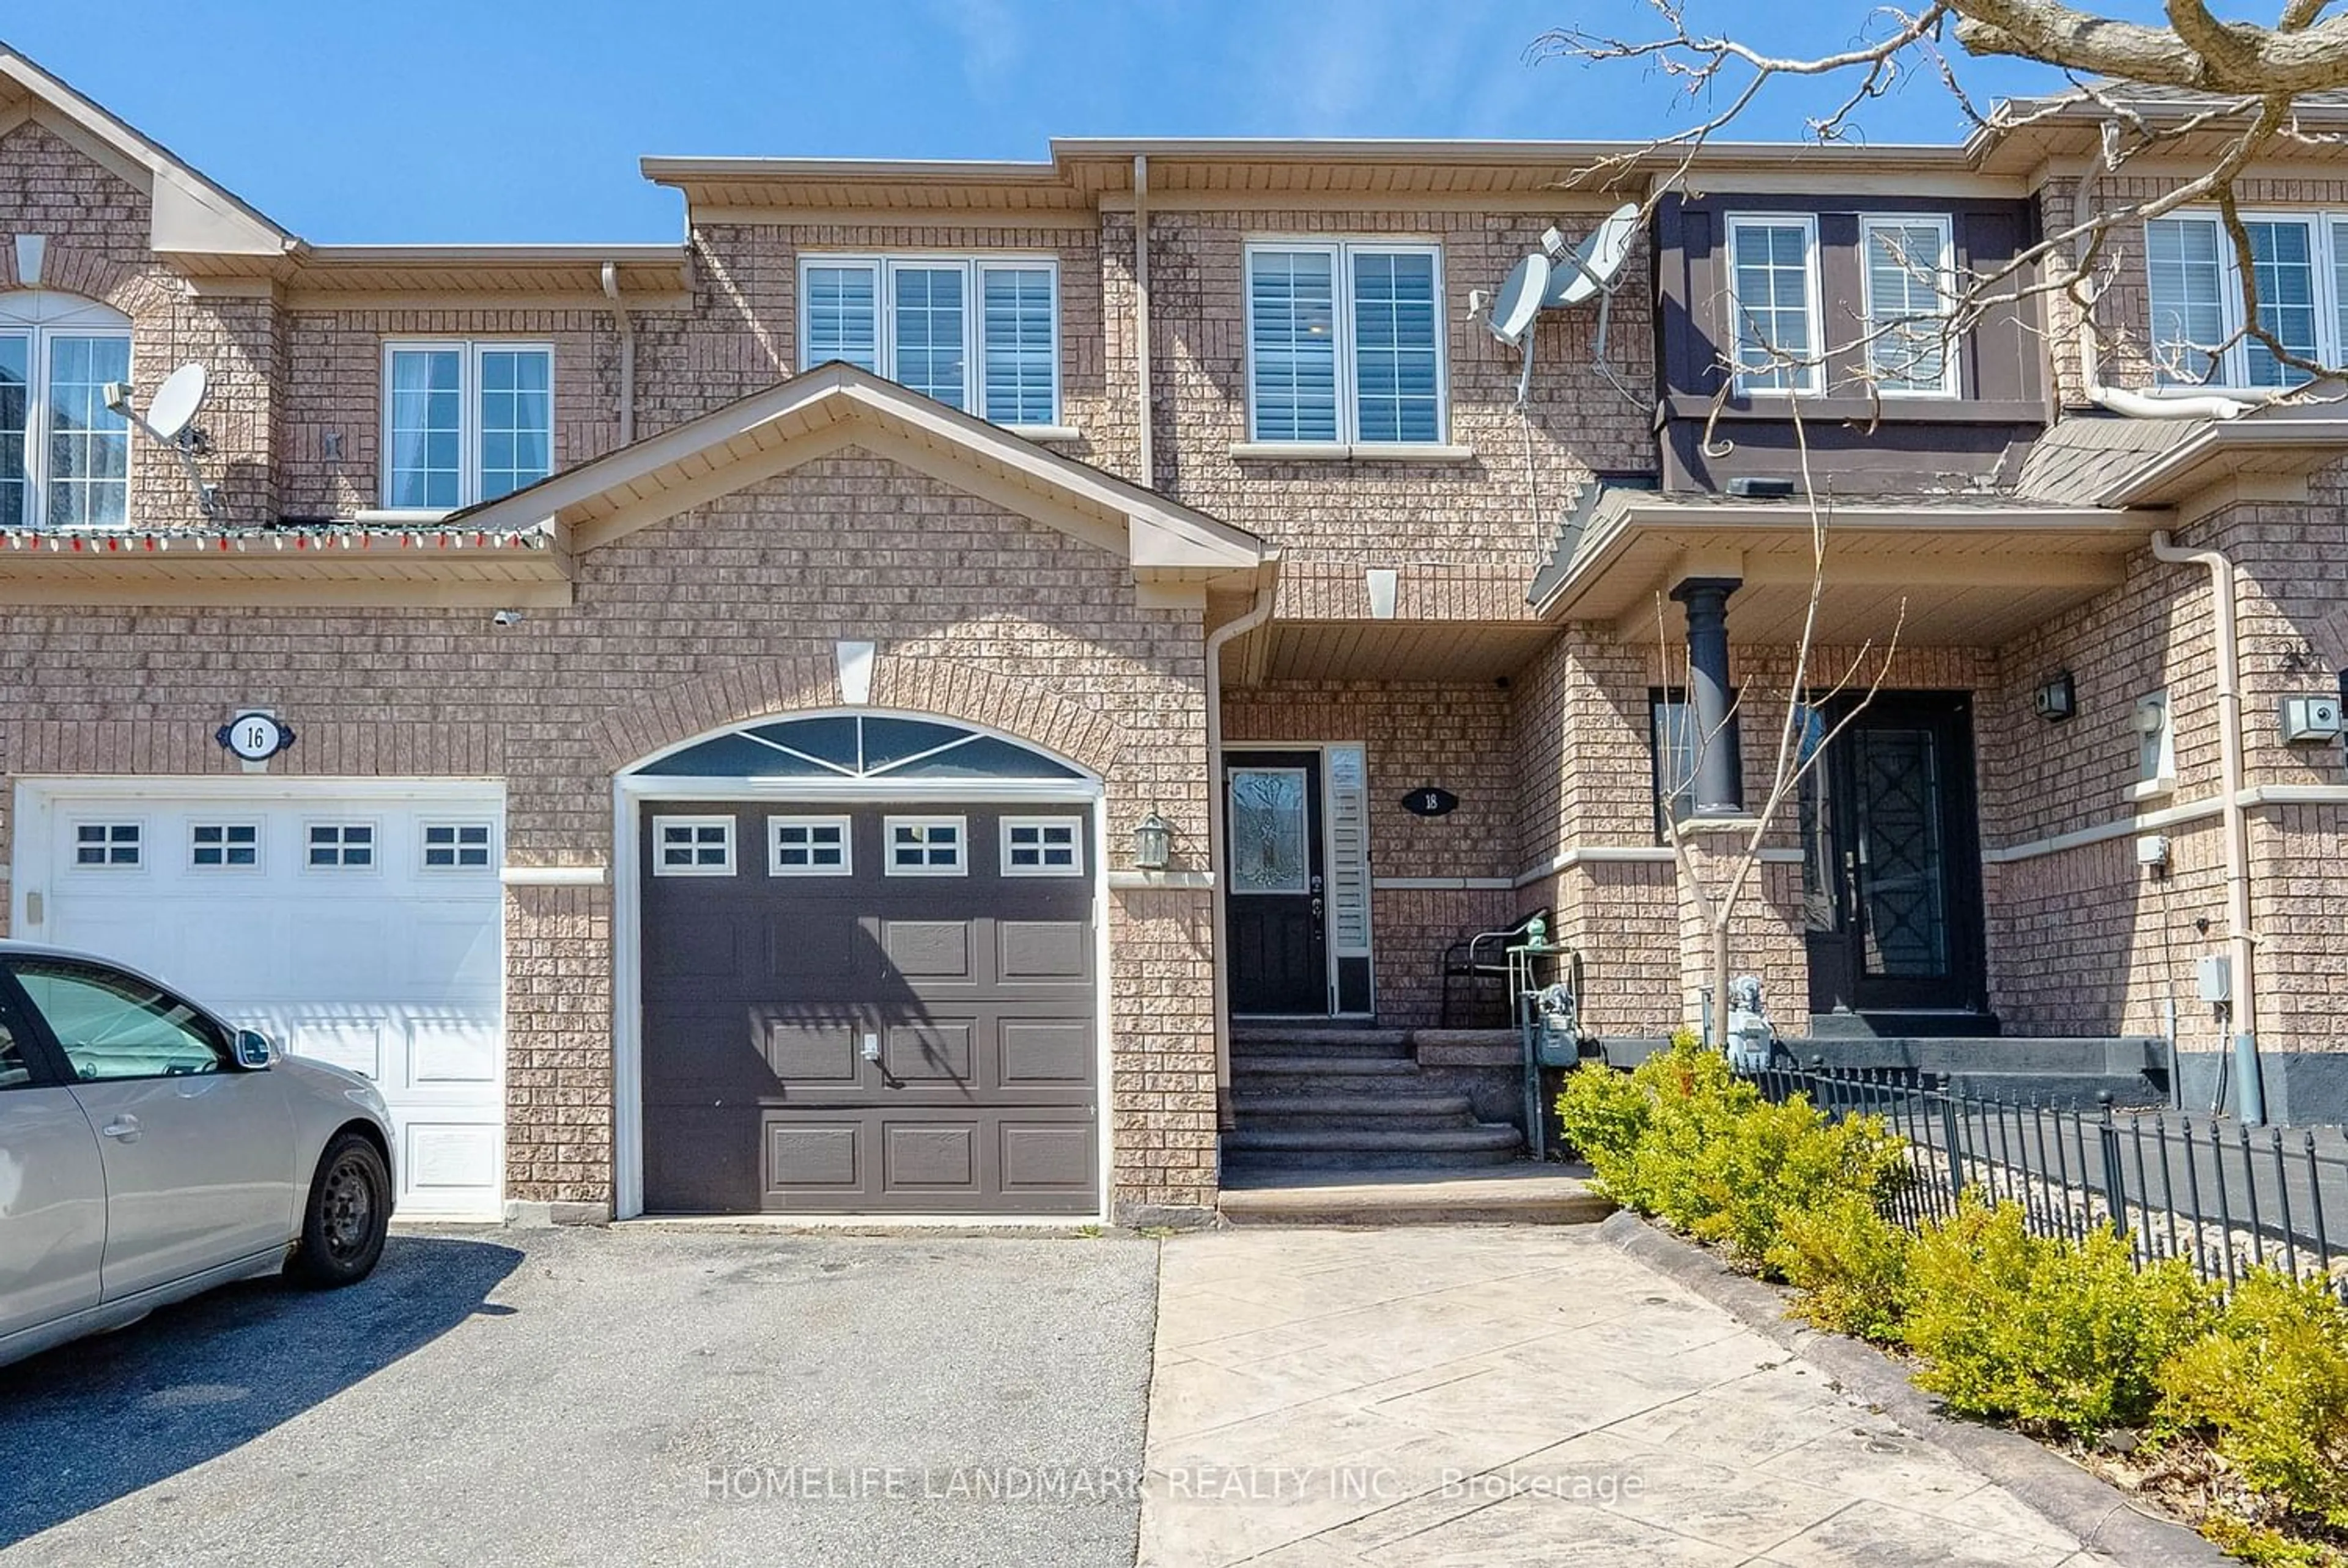 Home with brick exterior material for 18 Lodgeway Dr, Vaughan Ontario L6A 3S6